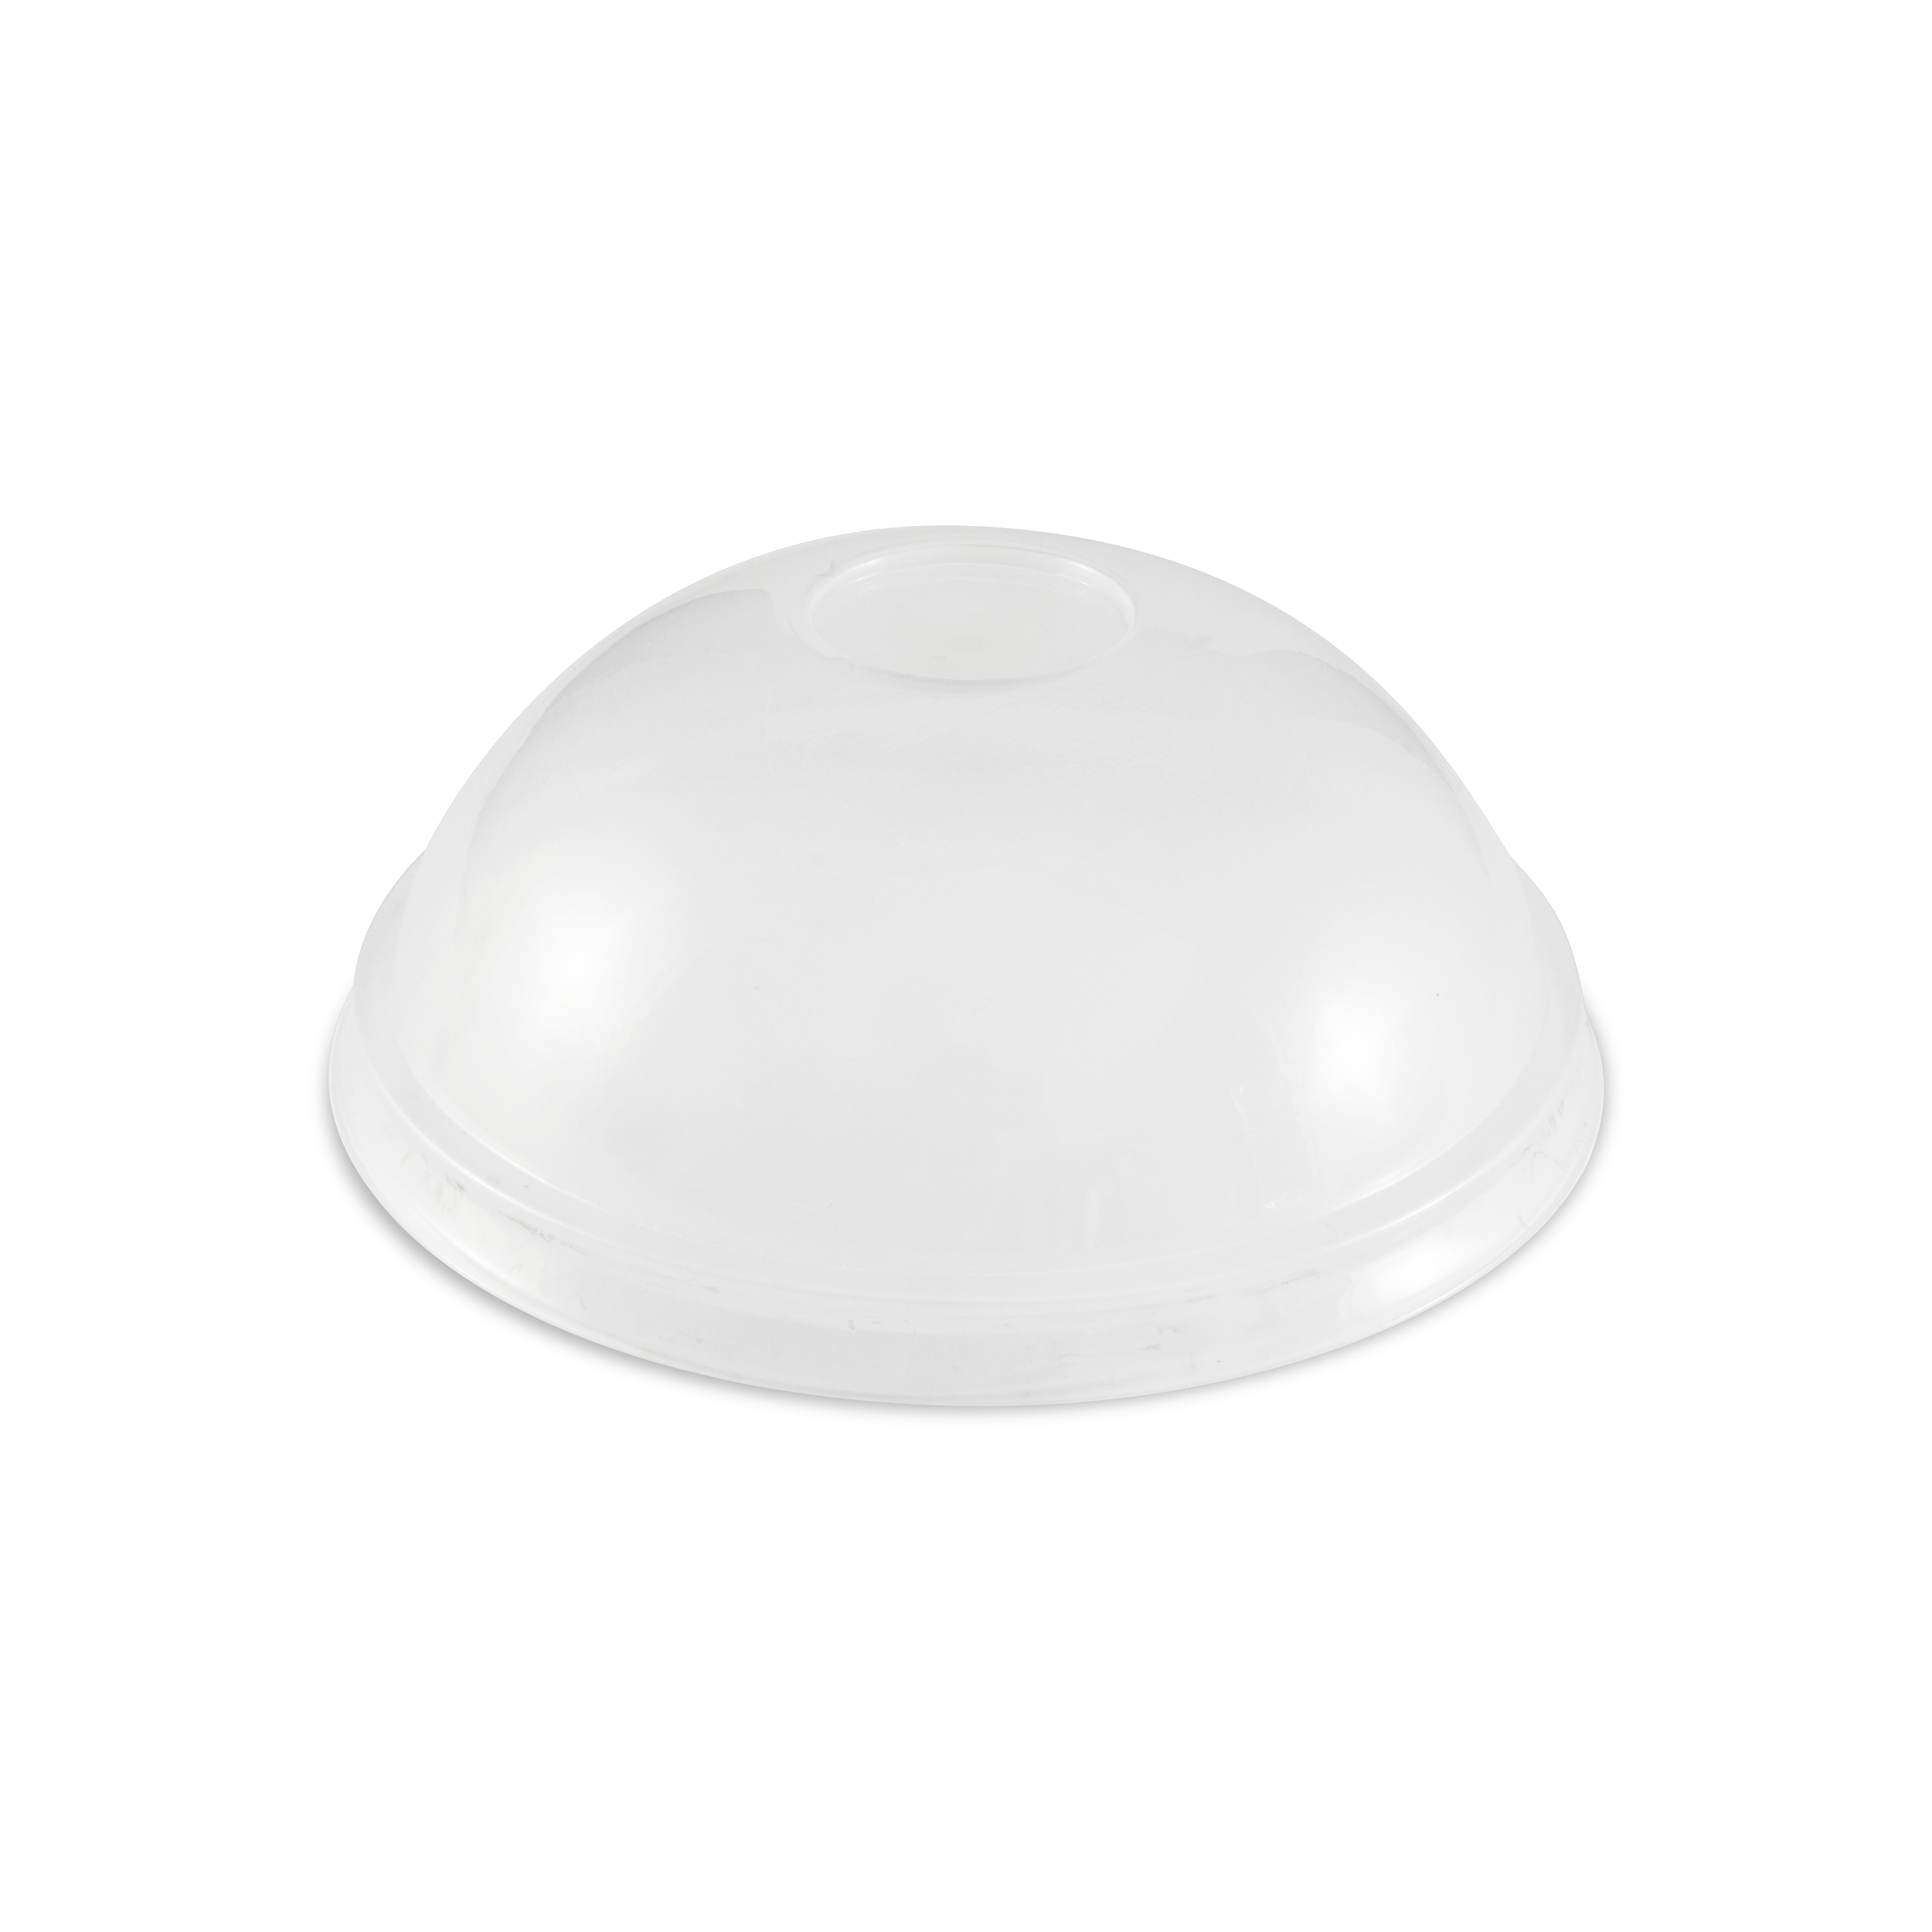 PP Dome Lid (95mm)